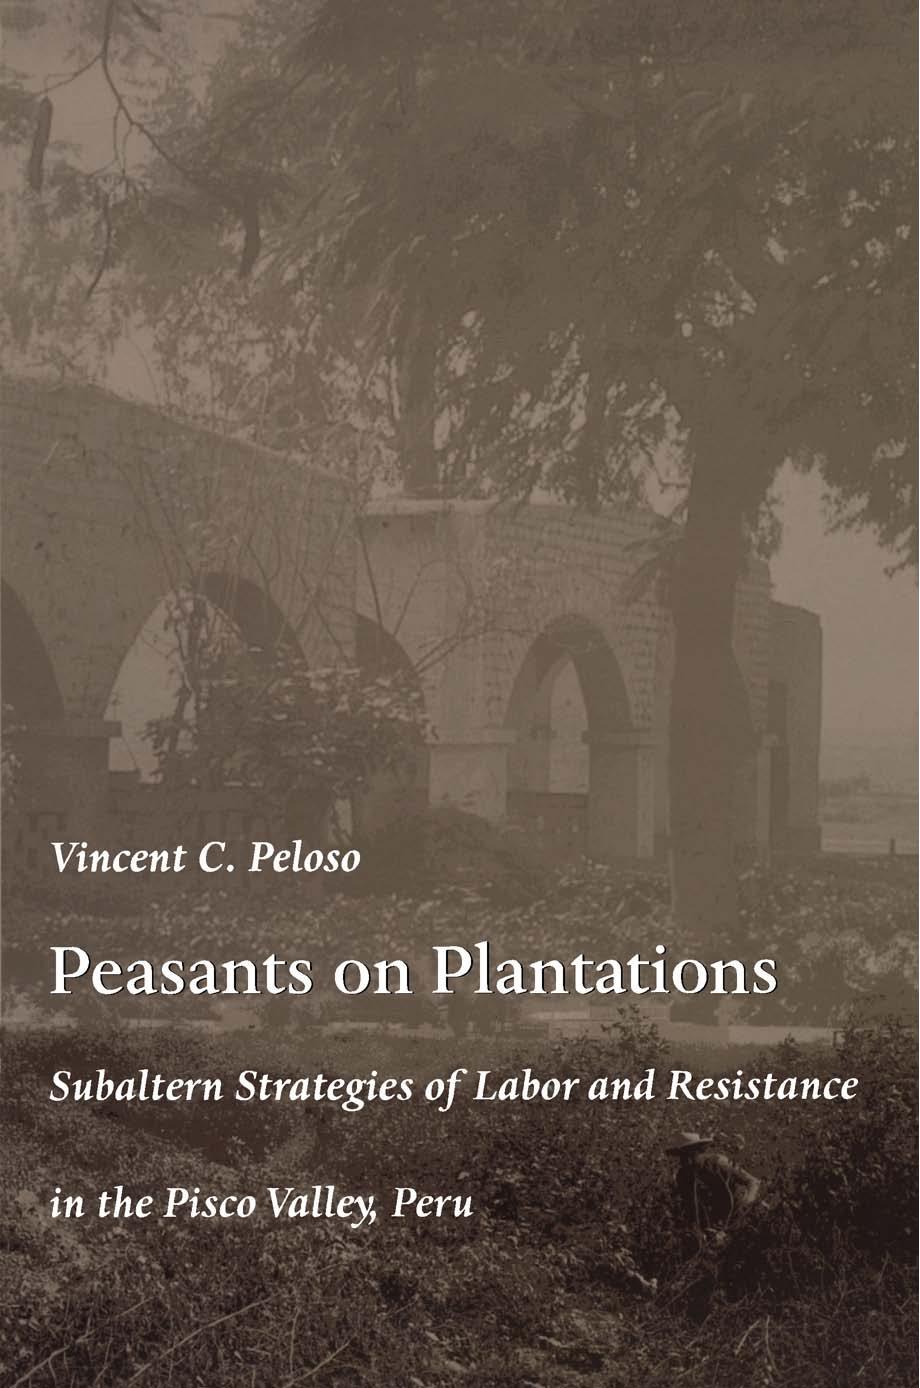 Peasants on Plantations: Subaltern Strategies of Labor and Resistance in the Pisco Valley, Peru by Vincent Peloso